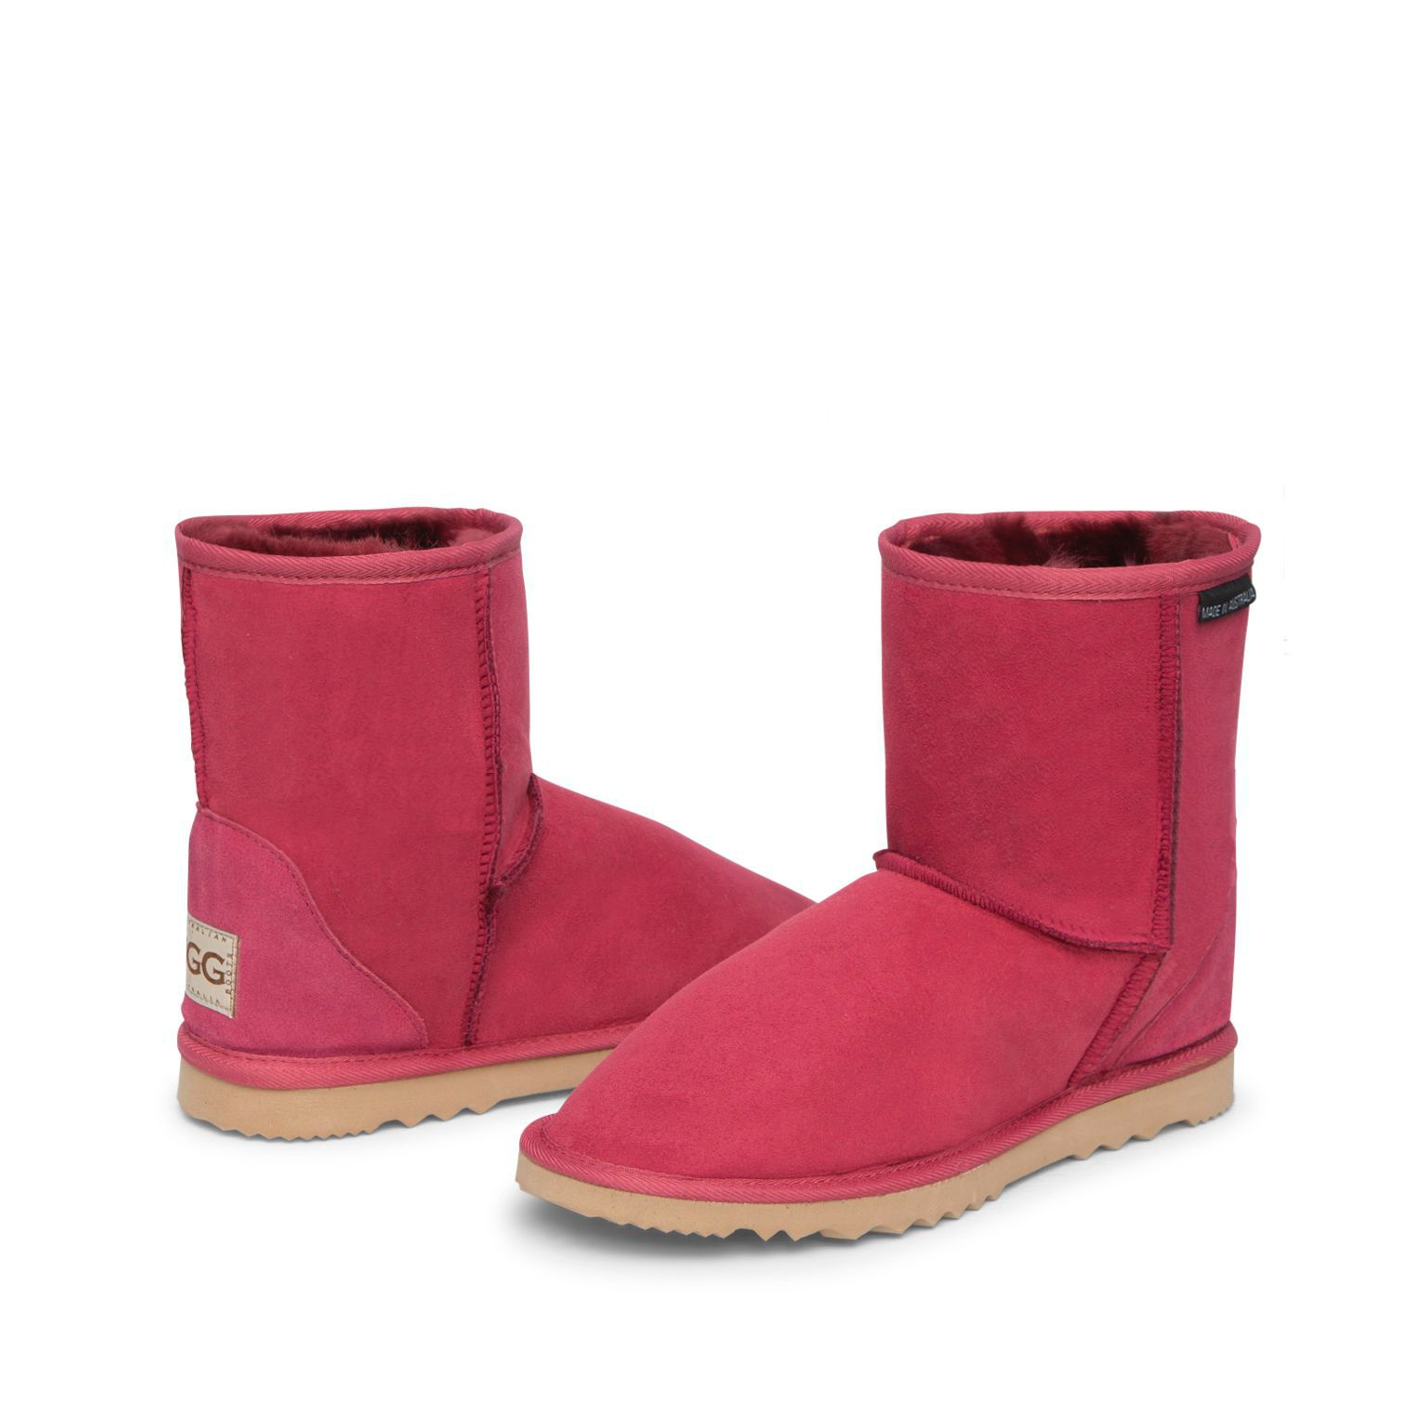 Pair of burgundy classic short ugg boots